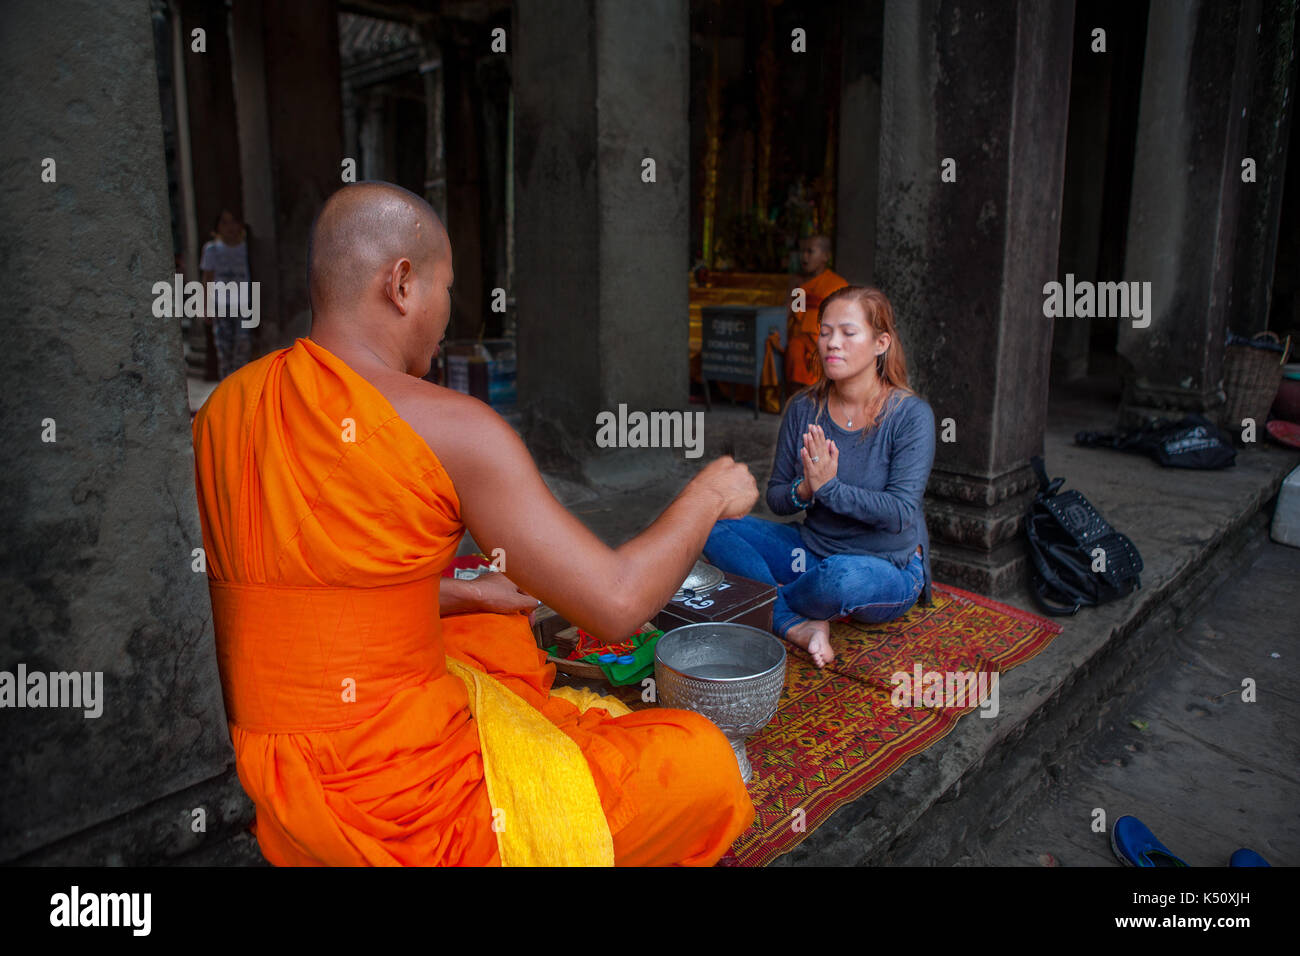 A female tourist at Angkor Wat temple complex receives a blessing from a Buddhist monk. Location is Siem Reap, Kingdom of Cambodia. Stock Photo